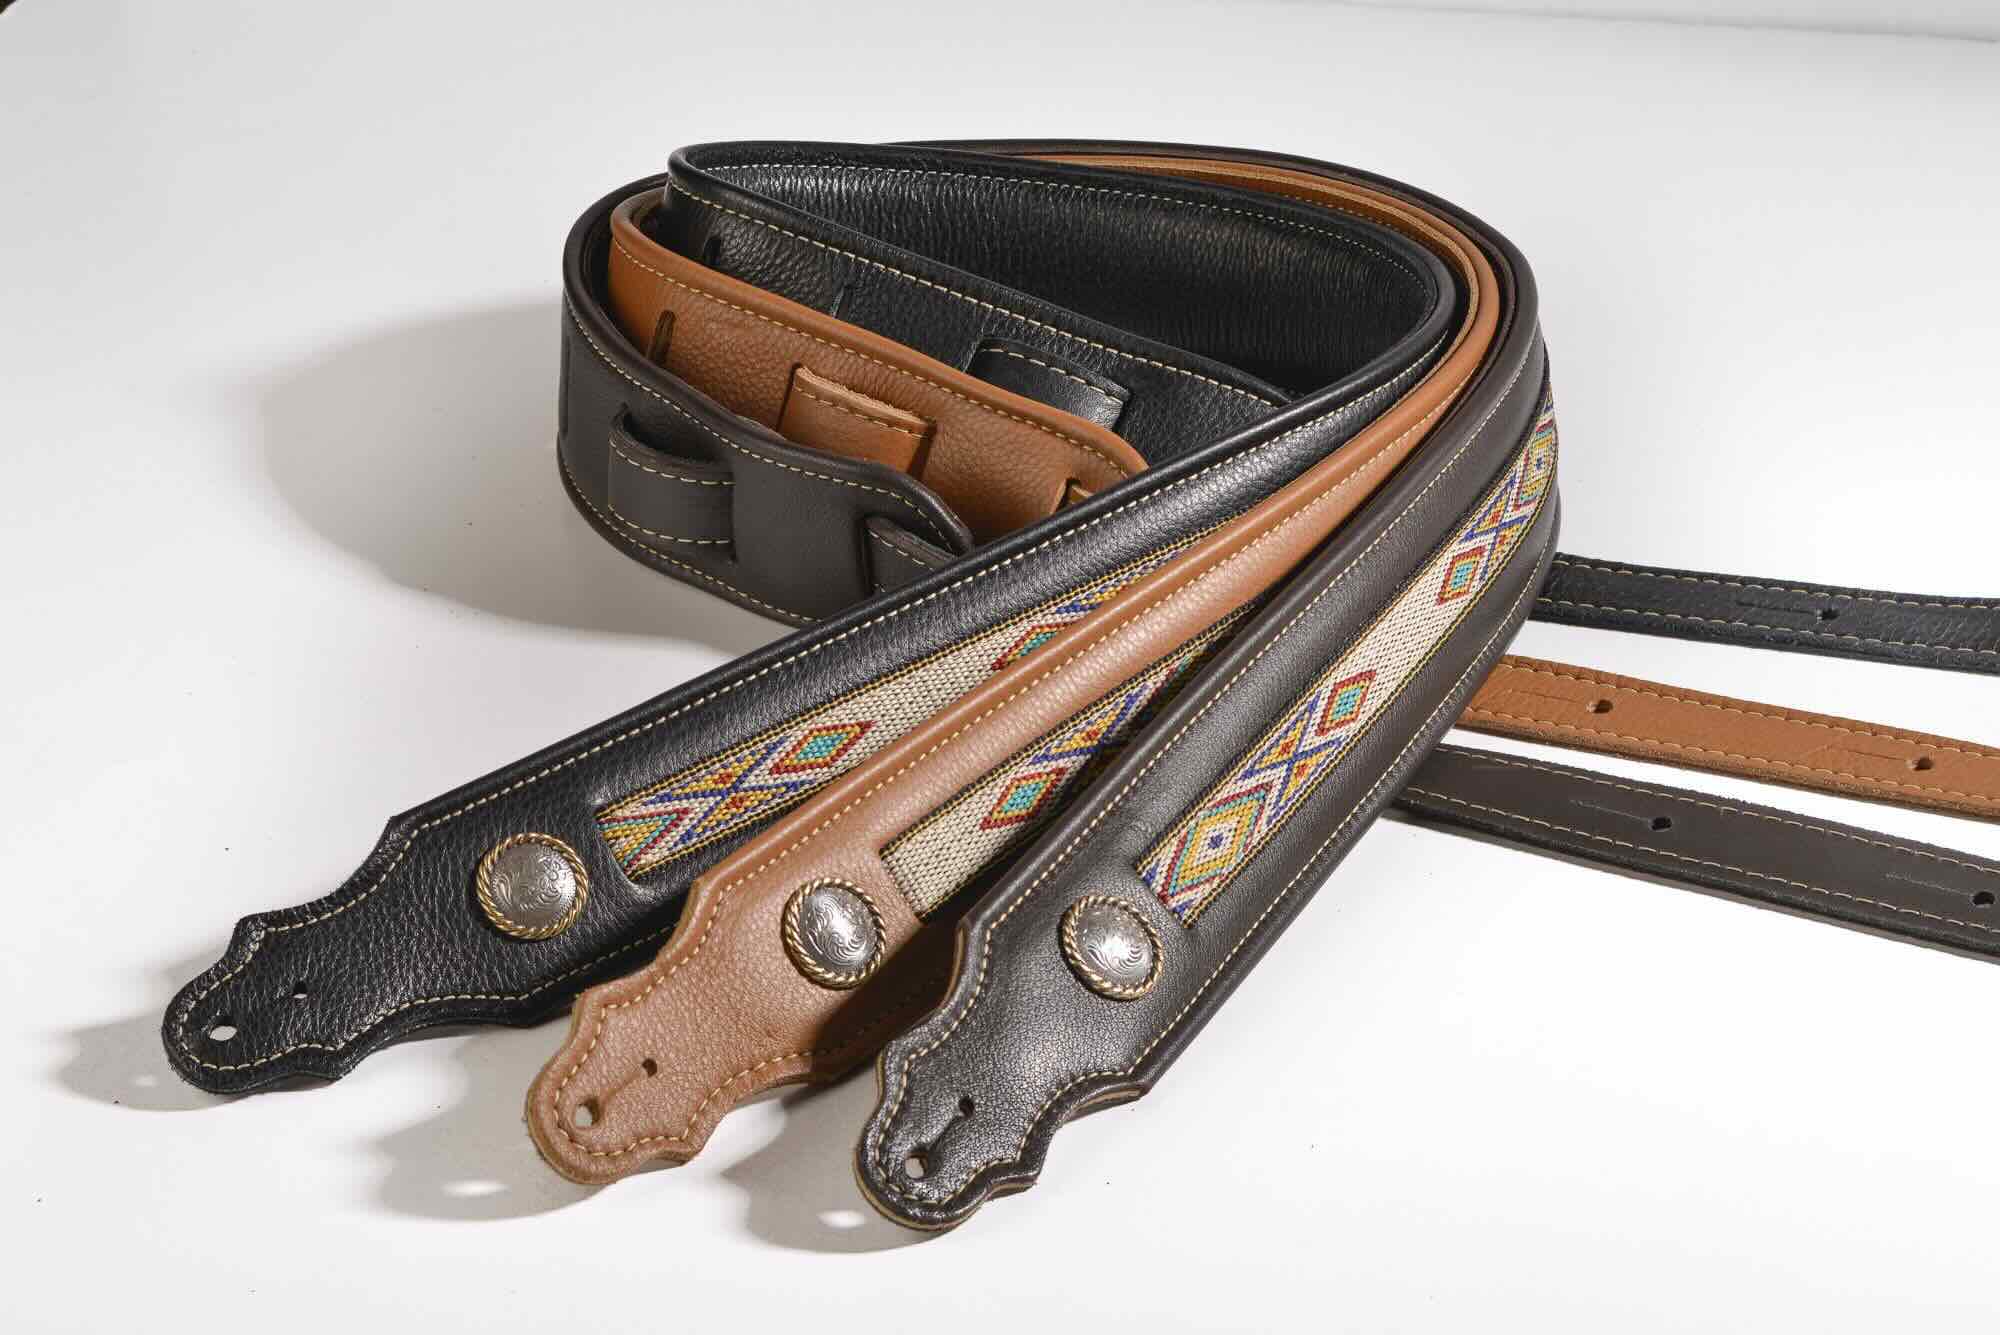 Review: Best Guitar Strap for Comfort and Style